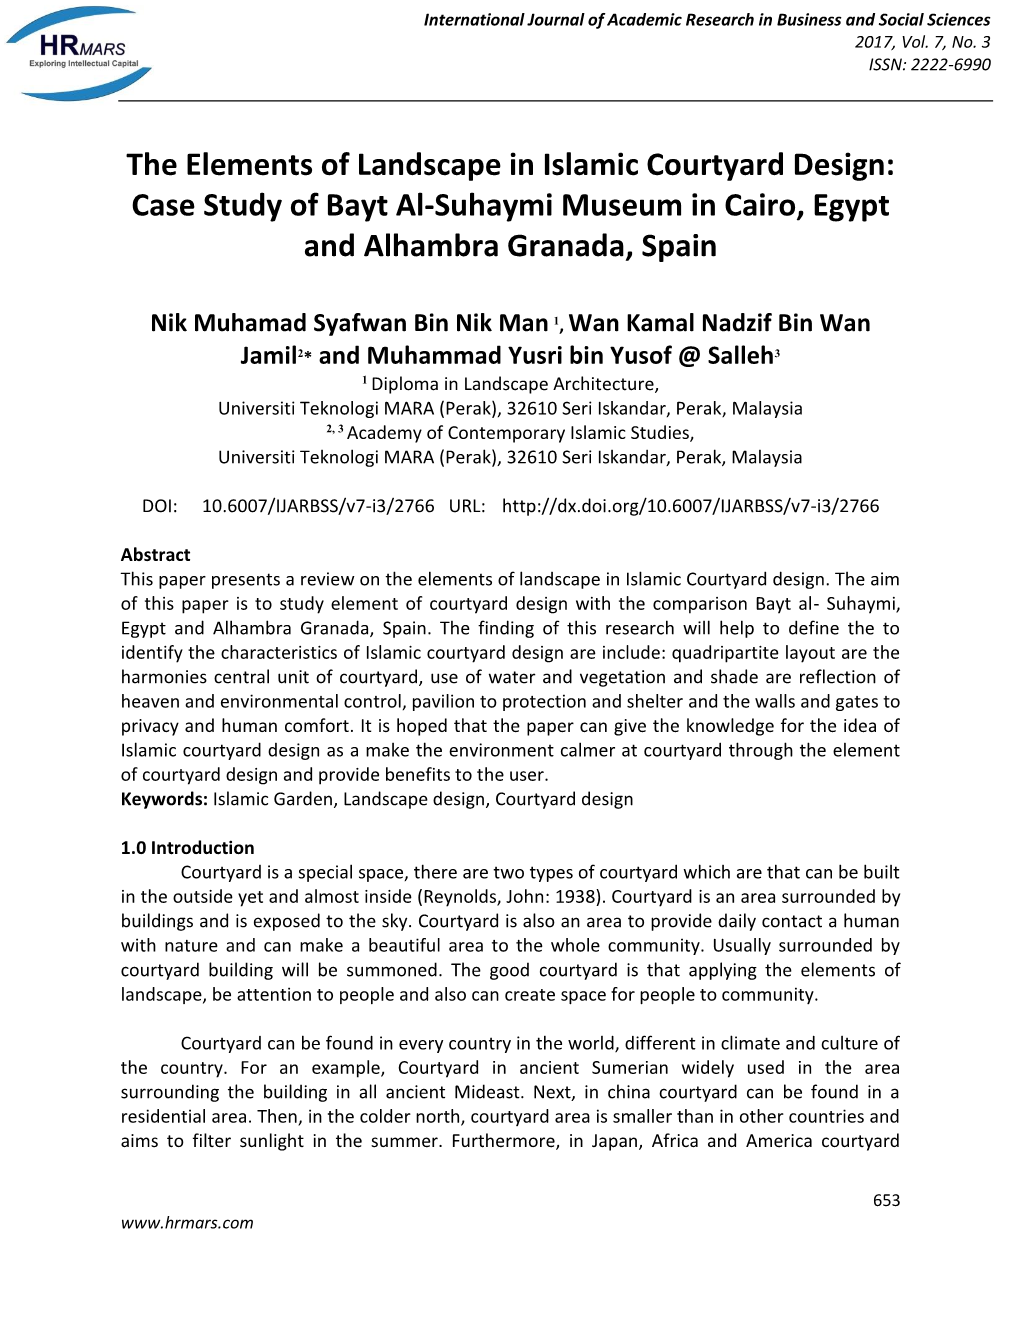 The Elements of Landscape in Islamic Courtyard Design: Case Study of Bayt Al-Suhaymi Museum in Cairo, Egypt and Alhambra Granada, Spain